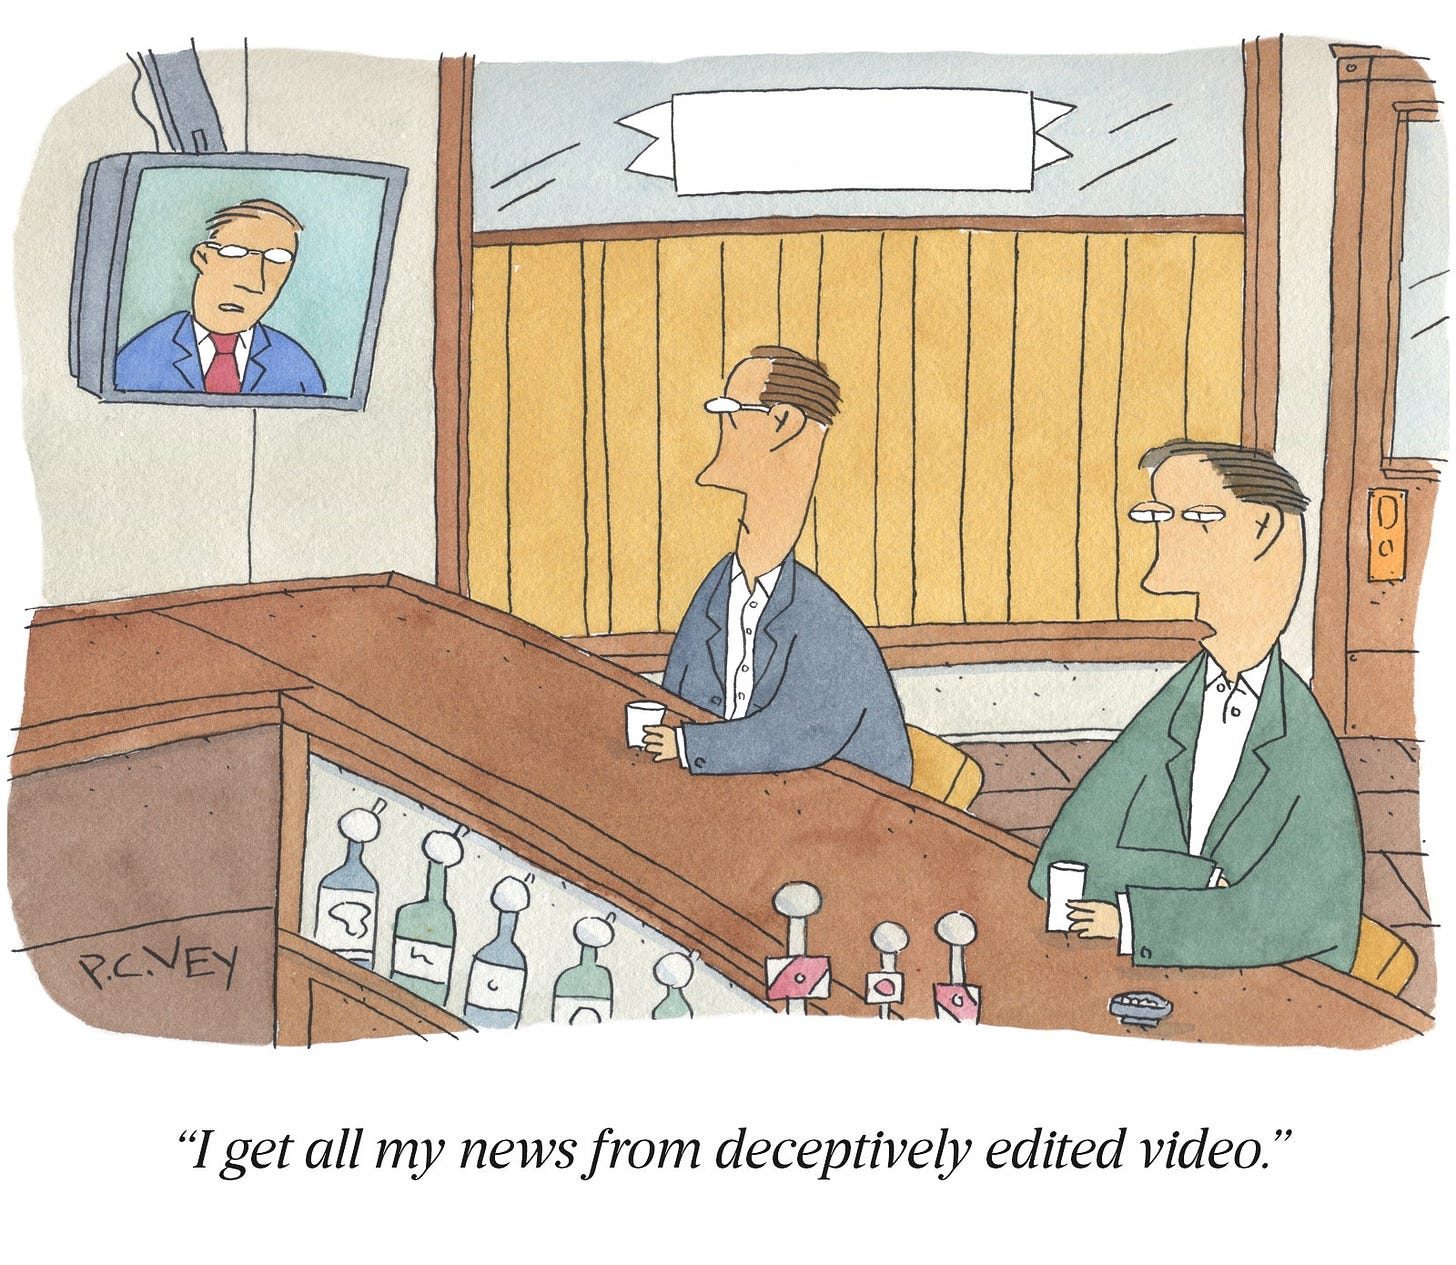 Cartoon of men at bar with news on tv. One says I get all my news from deceptively edited videos